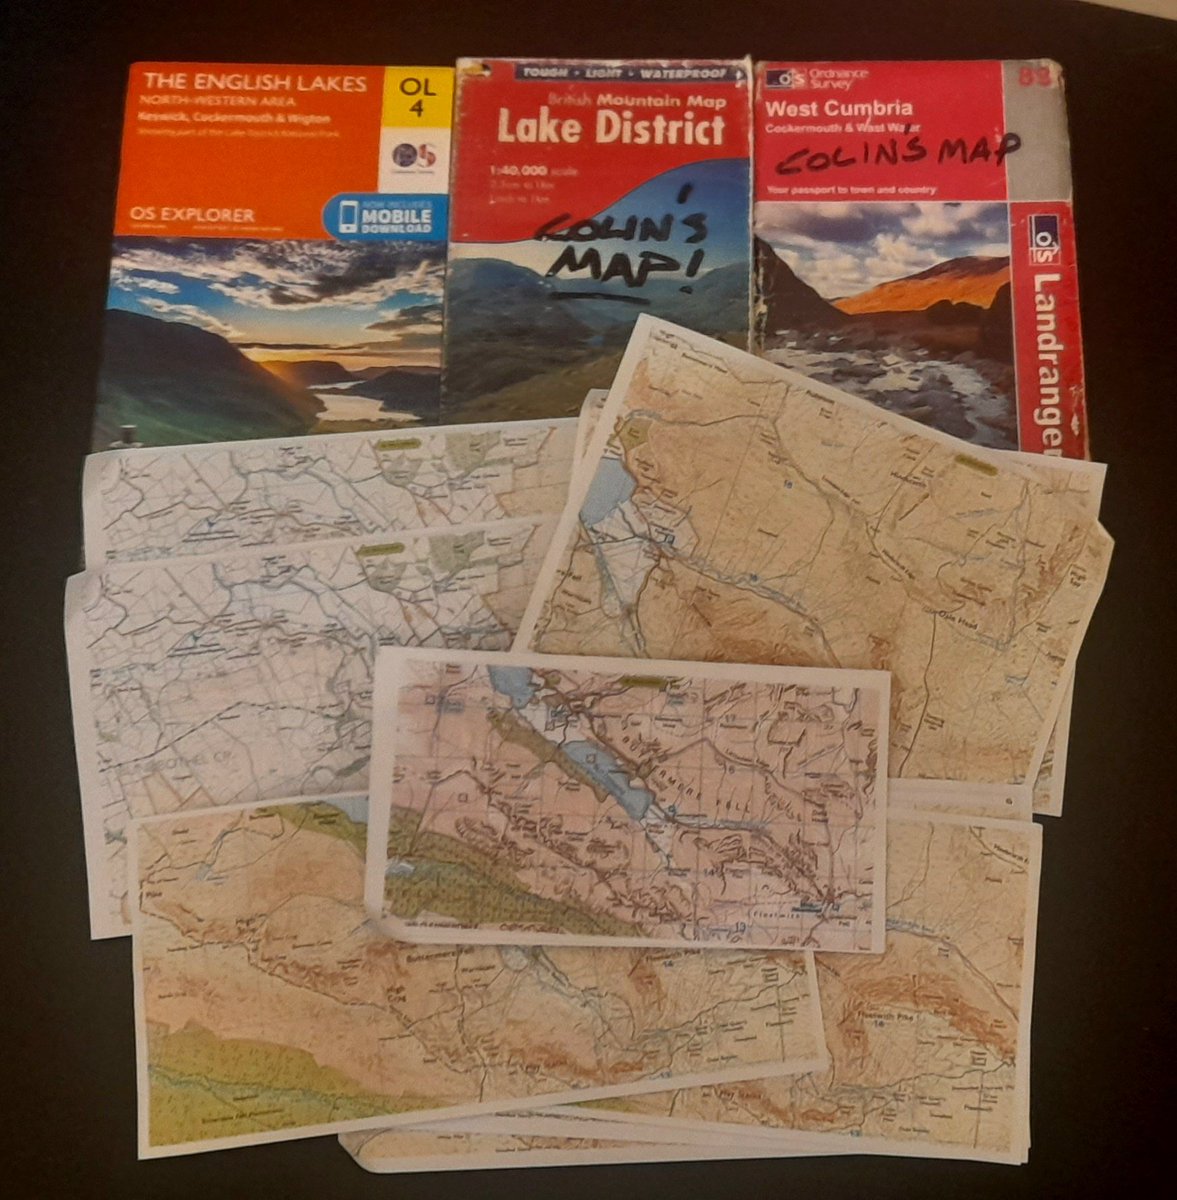 In Moors to Mountains world, I am currently heading to Lorton in the north western Lakes for a weekend with friends and reccying a couple of routes to guide clients over this summer.
#lakedistrict #Lorton #mountainwalks #lakedistrictnationalpark #mountainleader